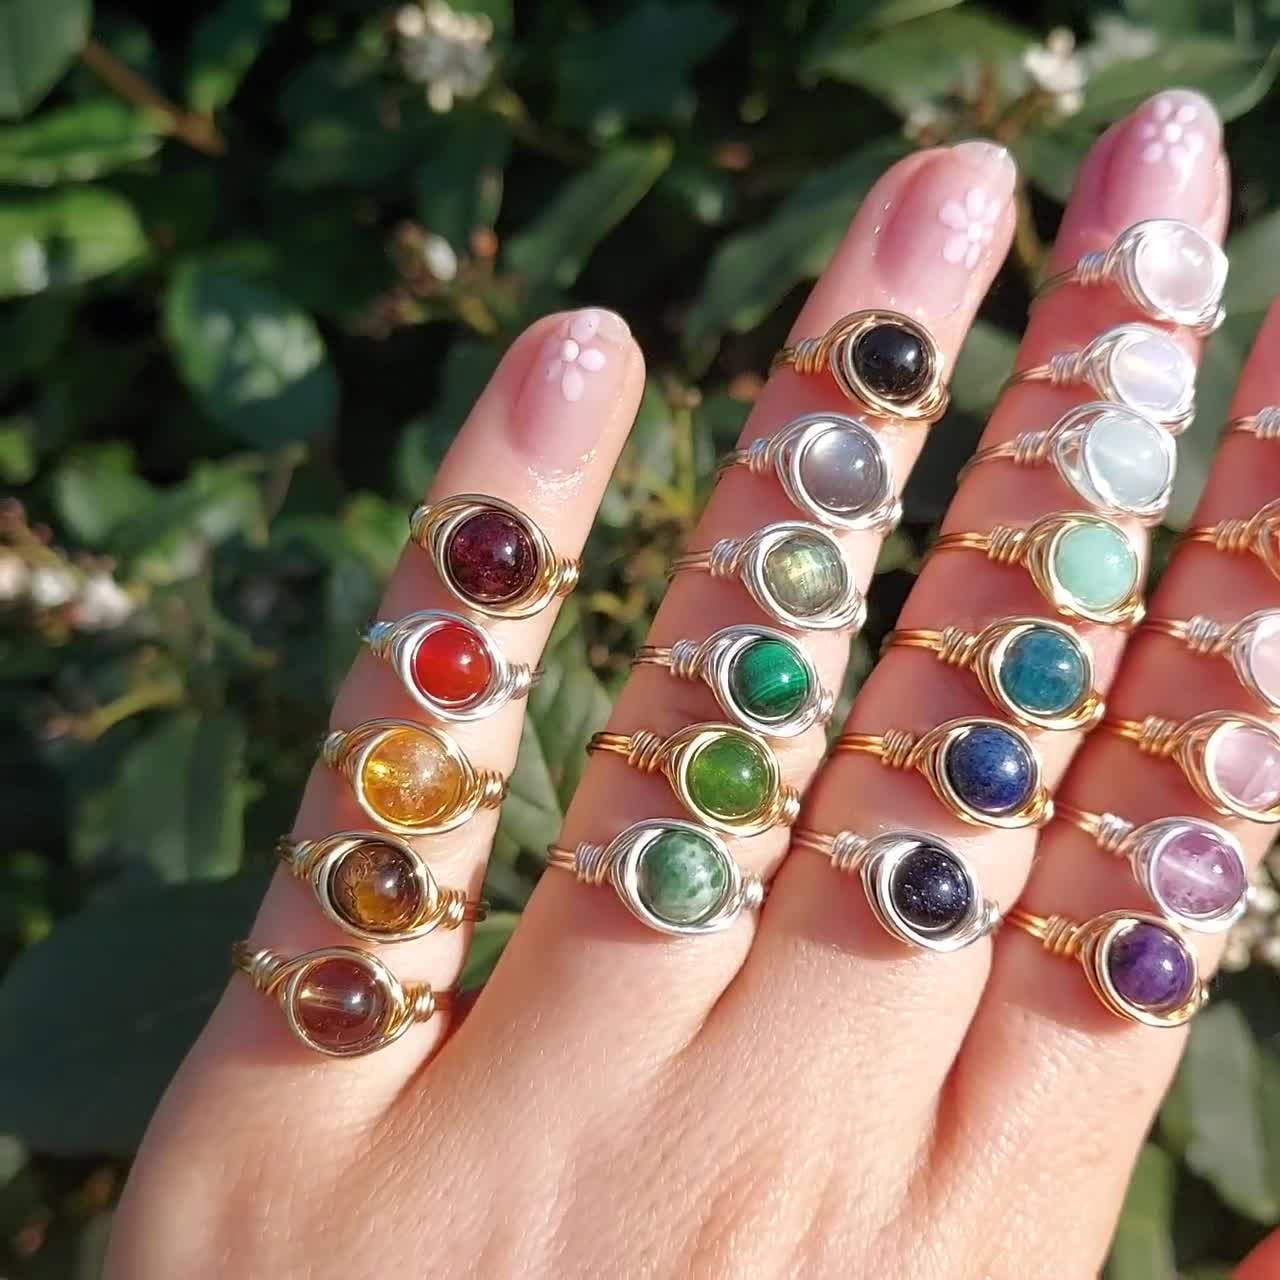 Gemstone Wire Wrapped Accessories Jewellery Rings Multi-Stone Rings Natural Spiritual Healing Crystal Jewellery Crystal Gift for Her Labradorite Braided Ring 